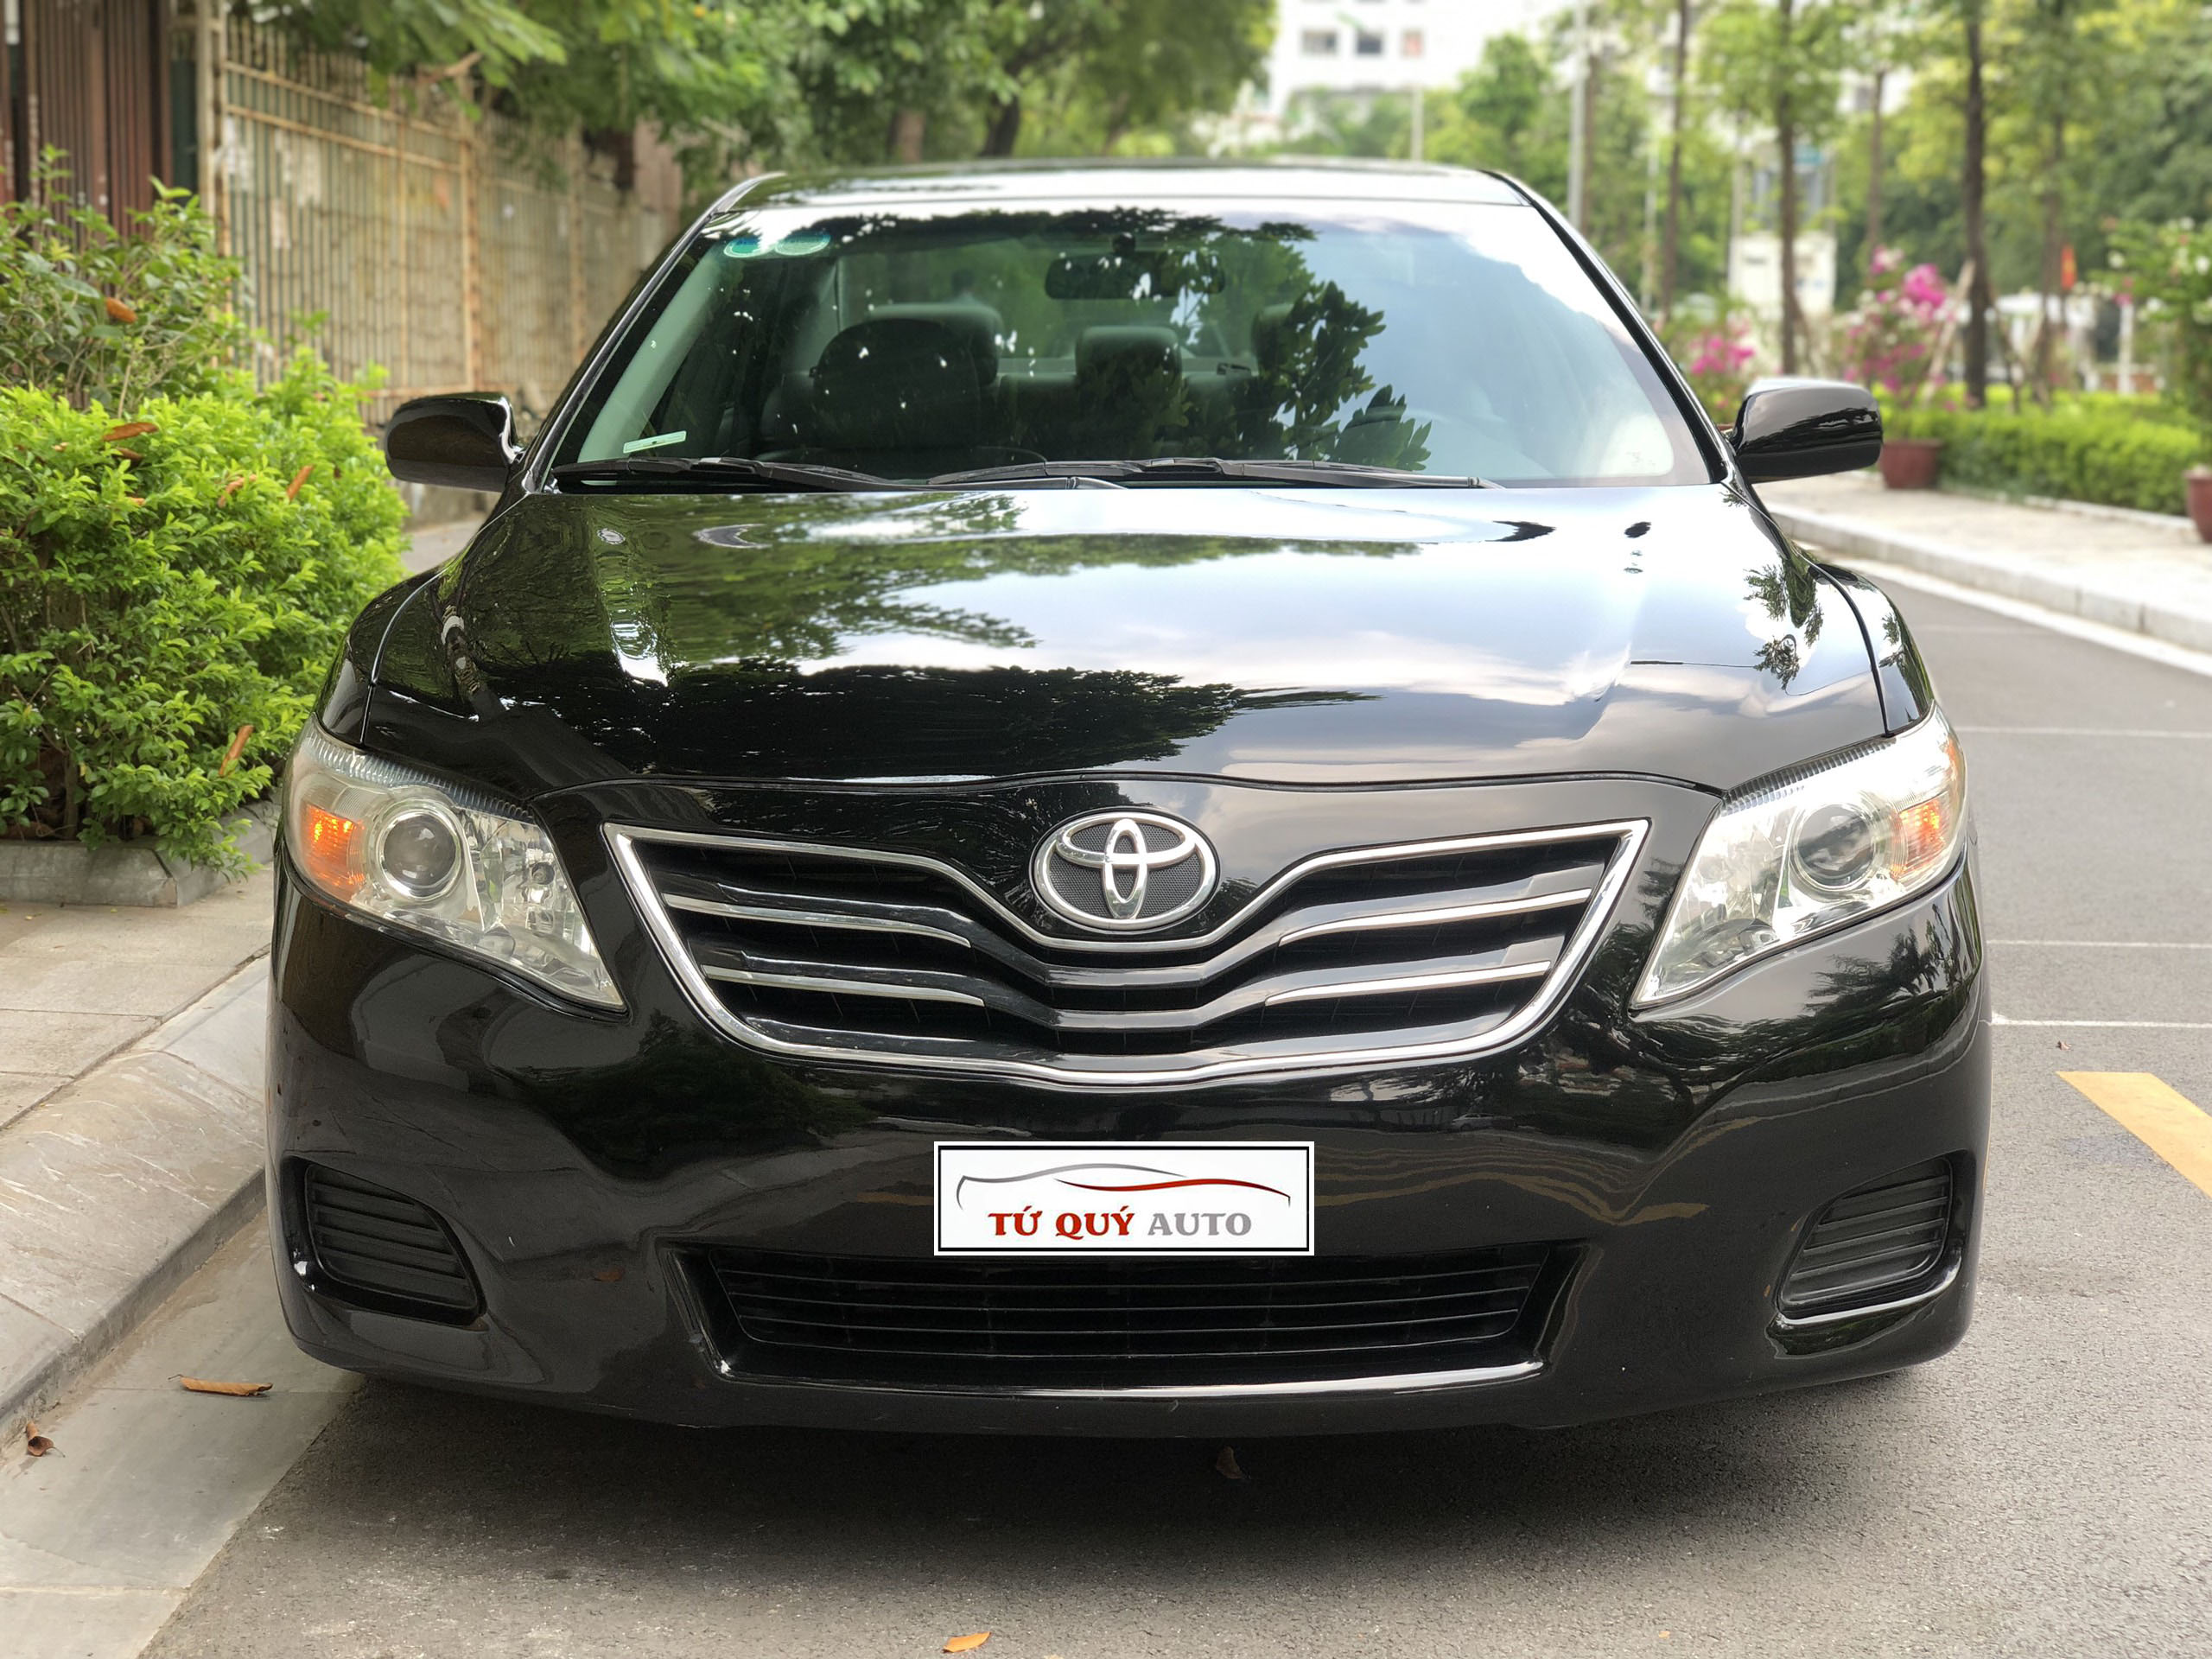 2010 Toyota Camry Review Problems Reliability Value Life Expectancy MPG